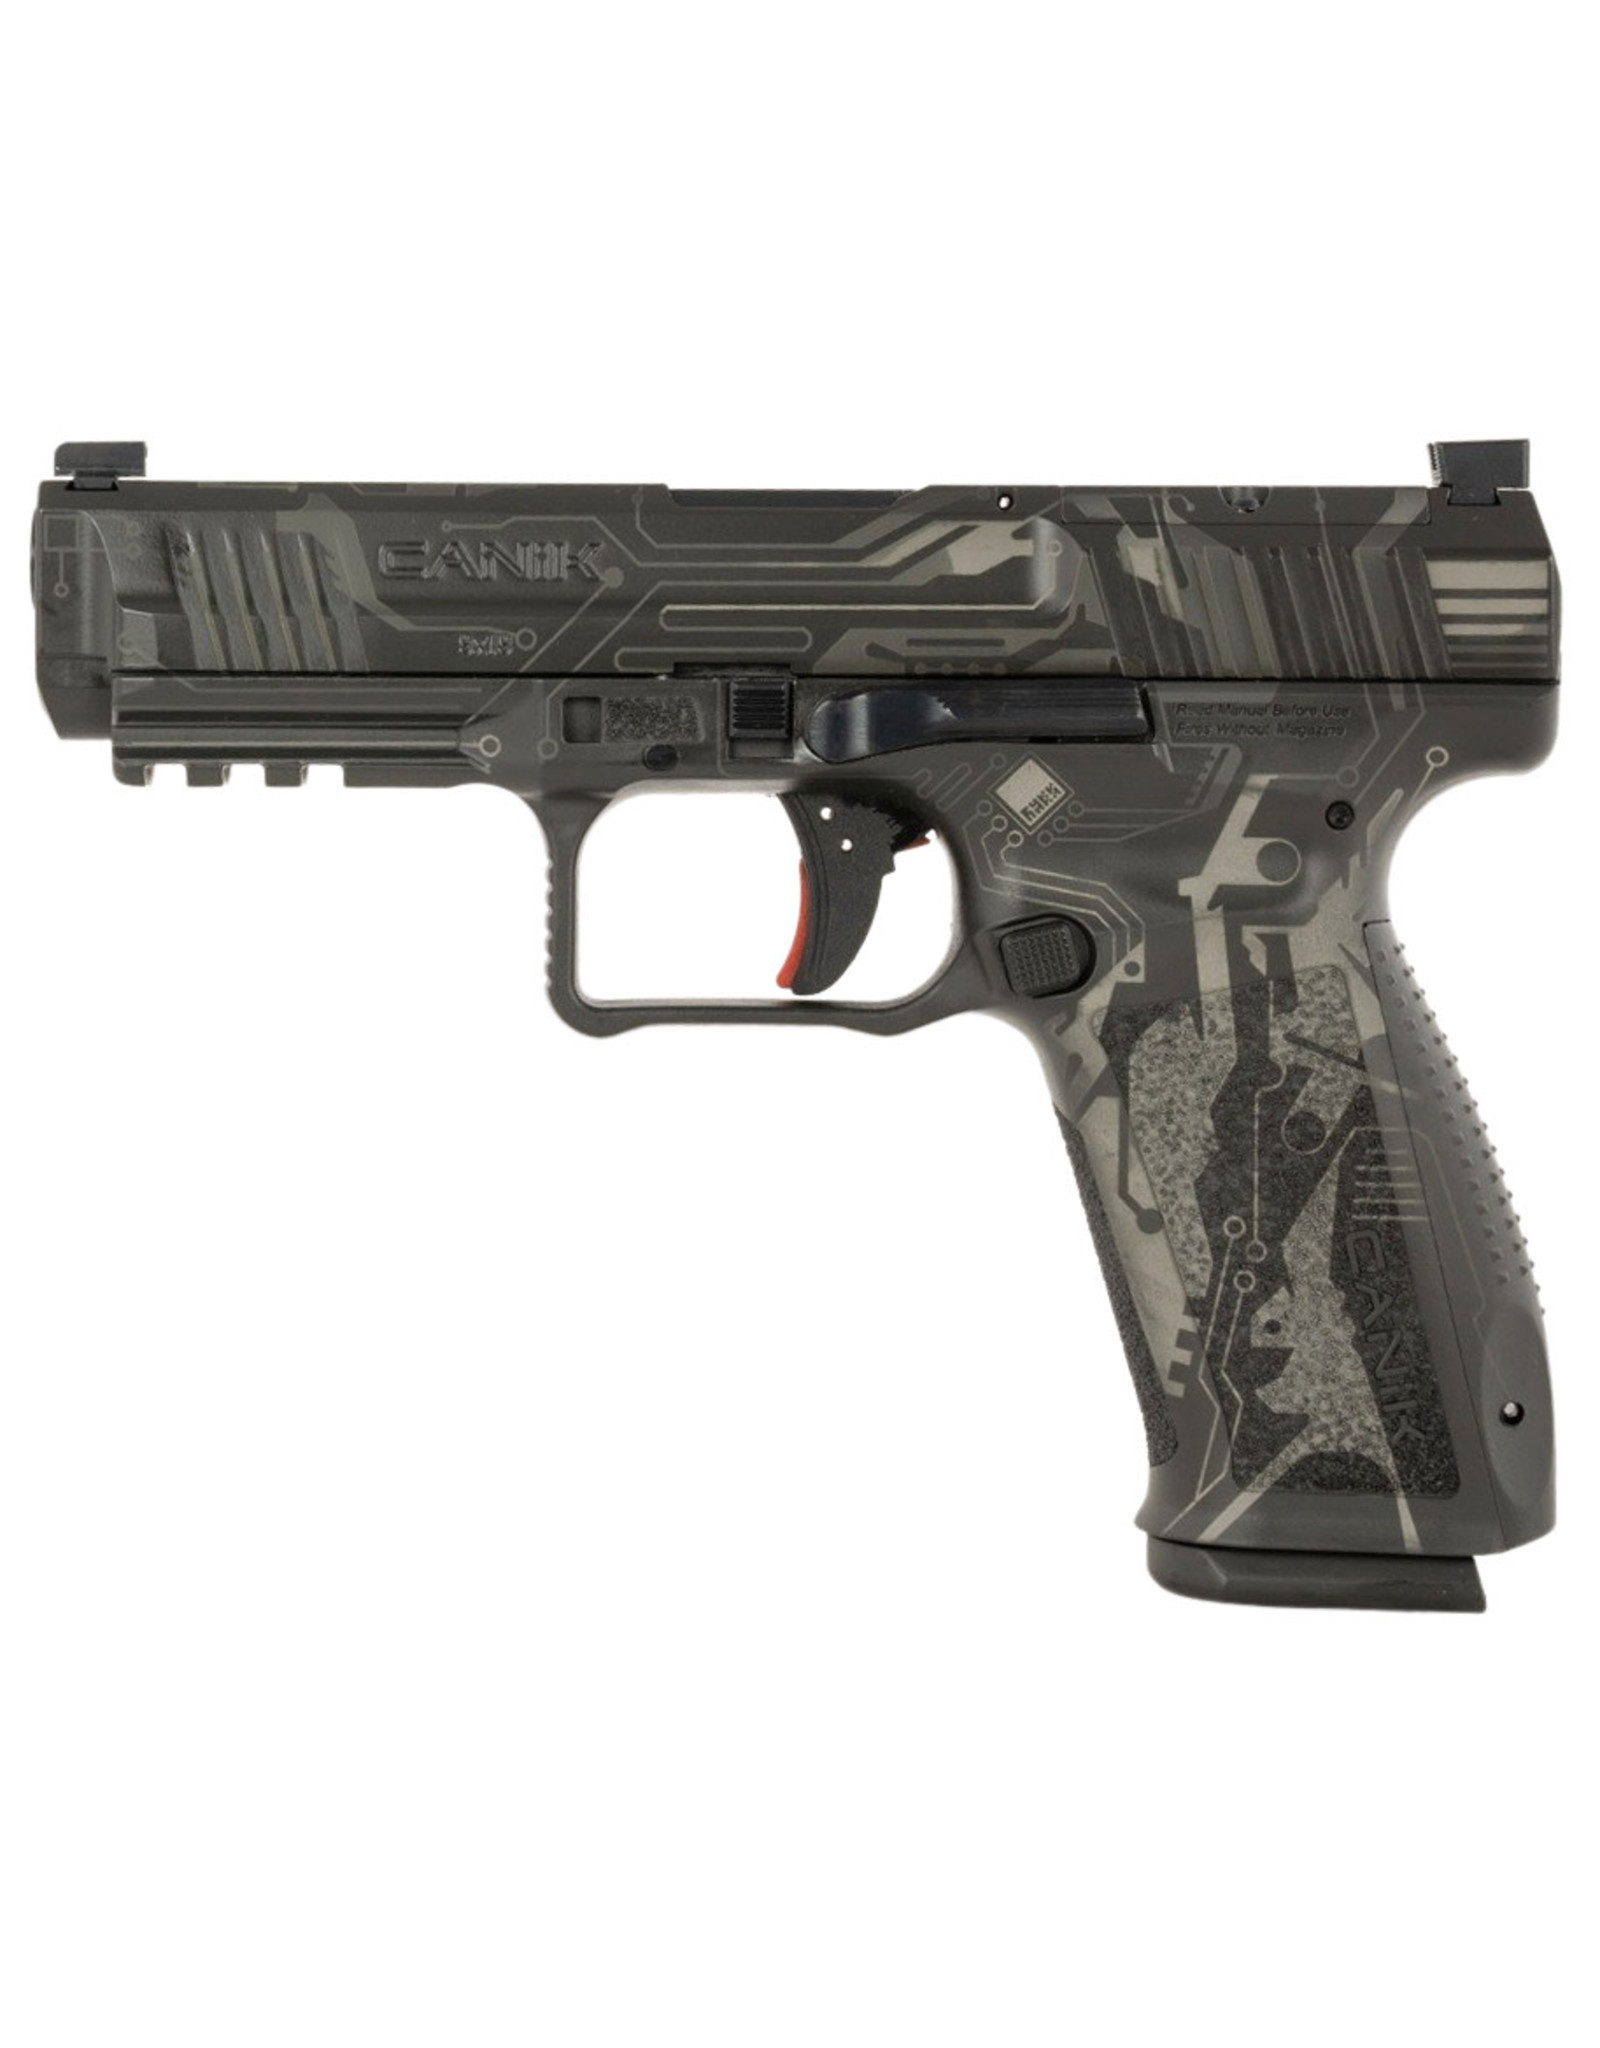 Canik Mete SFT 9mm 4.46" bbl 18 & 20 +1 Rnds Dark Gray Cyber Optic Ready